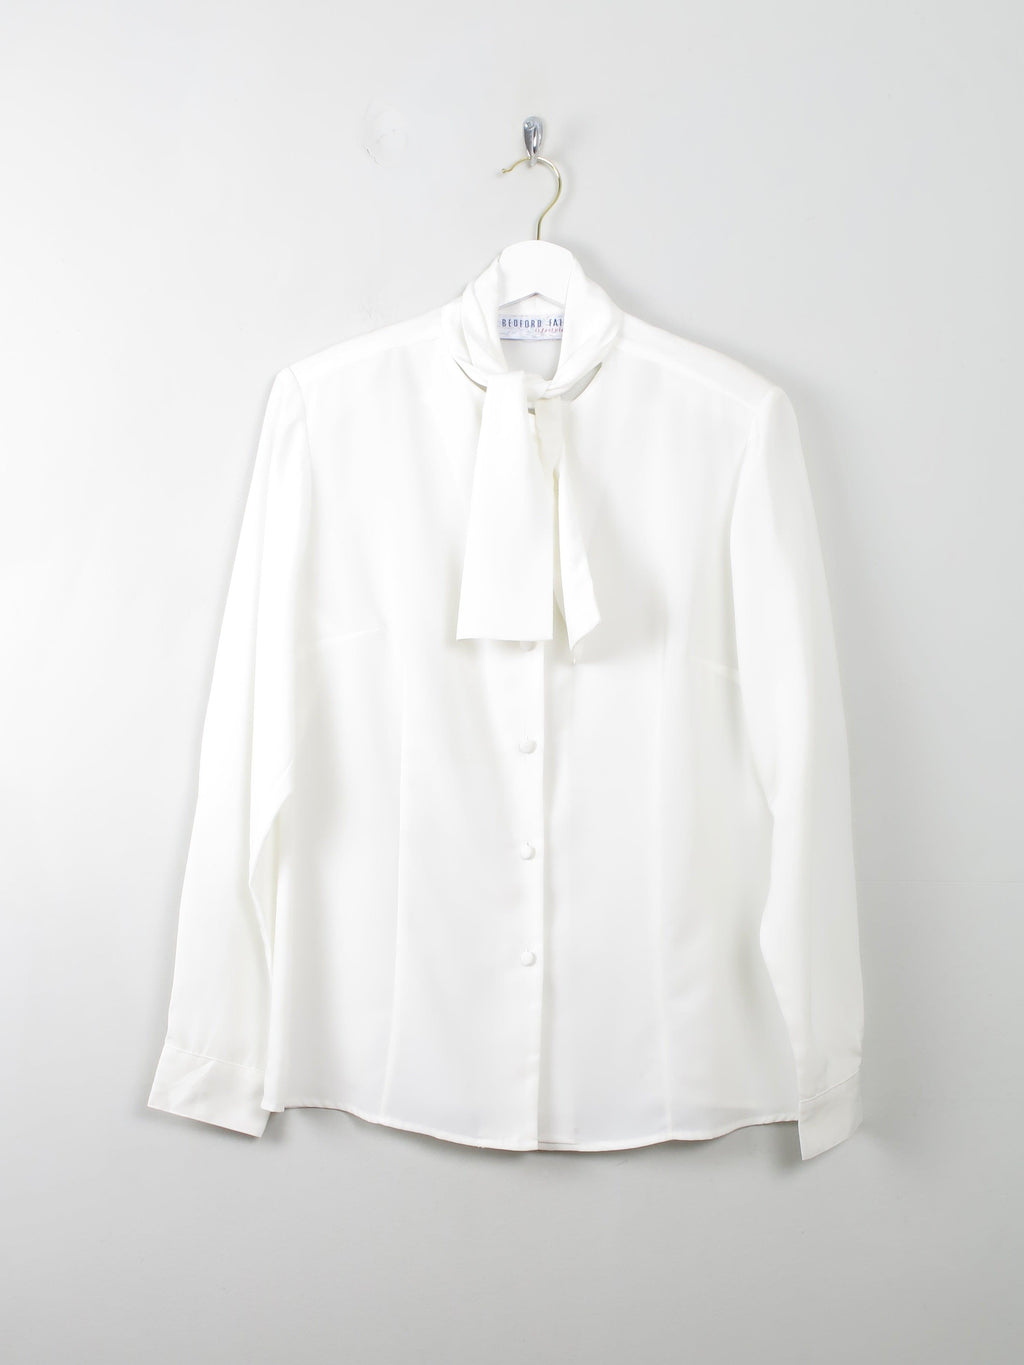 Women's Cream Vintage Blouse With Bow Detail S/M - The Harlequin